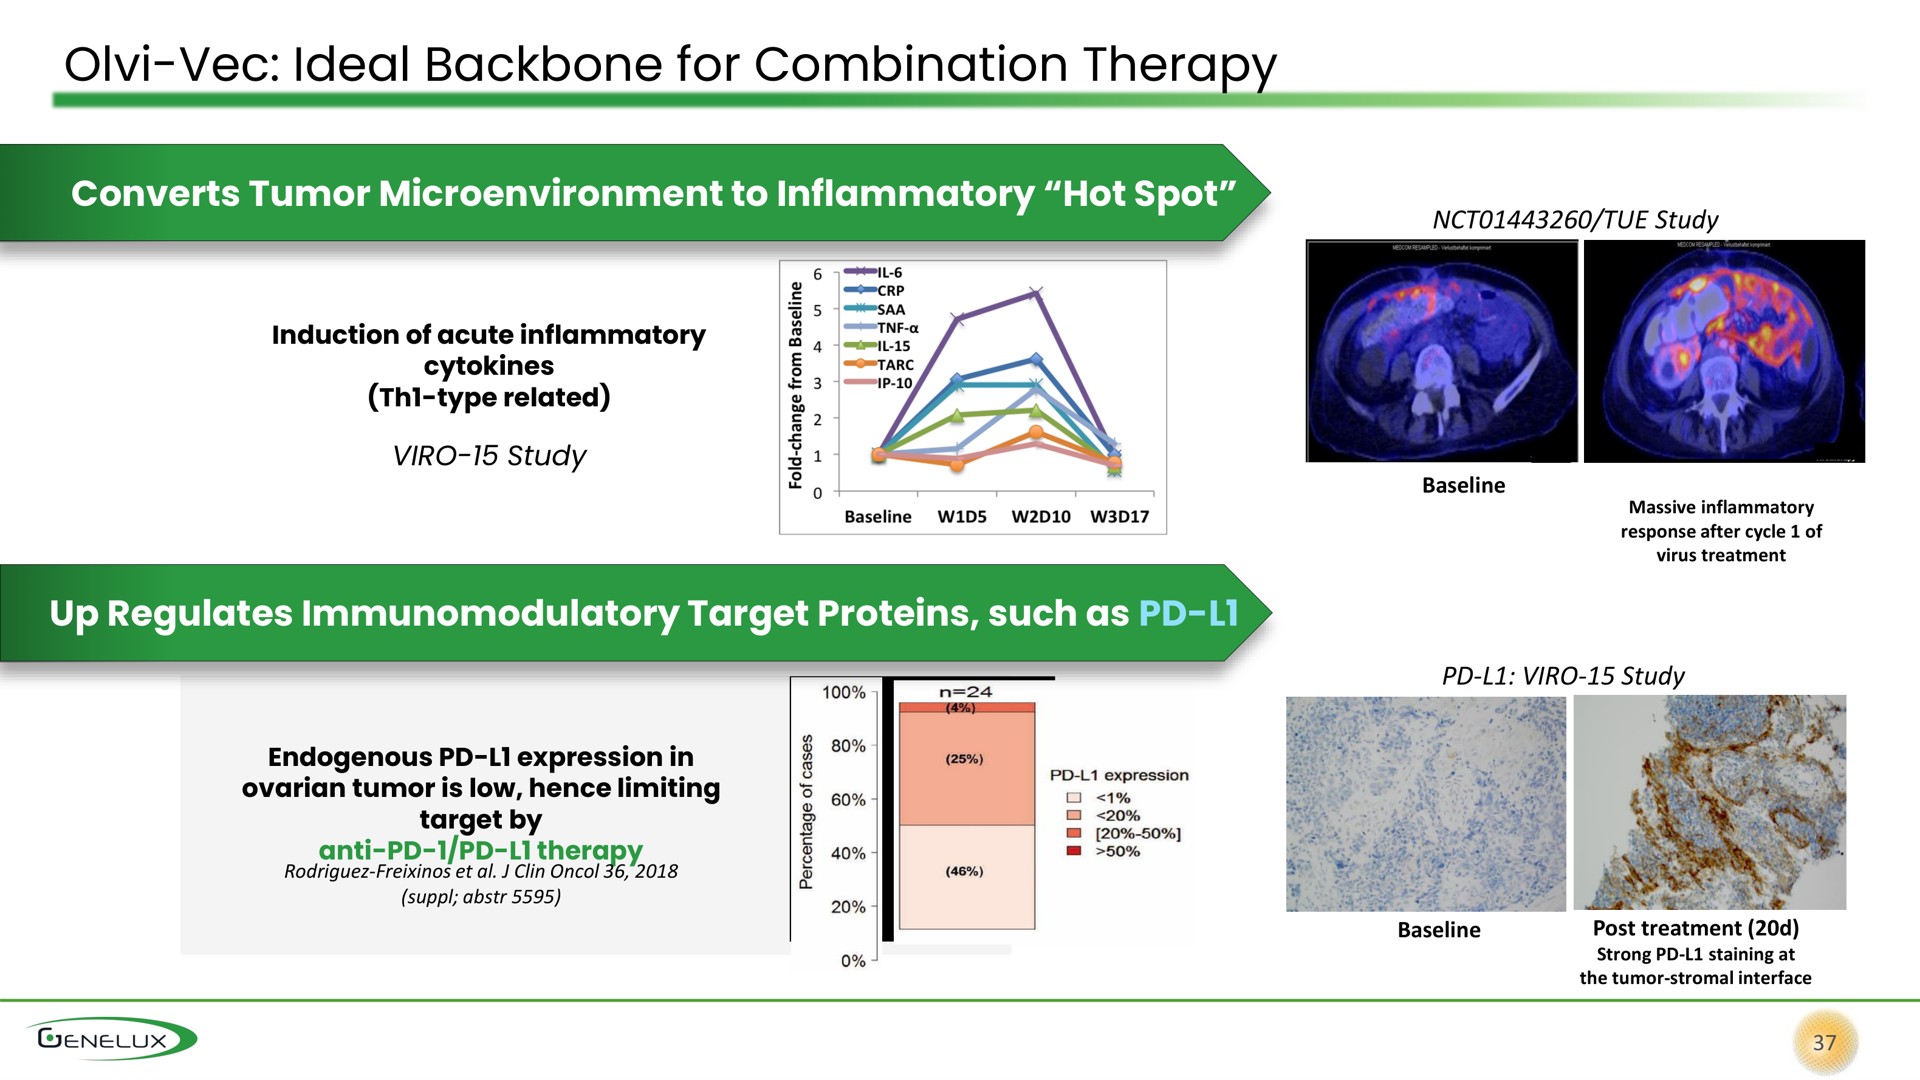 ideal backbone for combination therapy converts tumor to inflammatory hot spot | Genelux